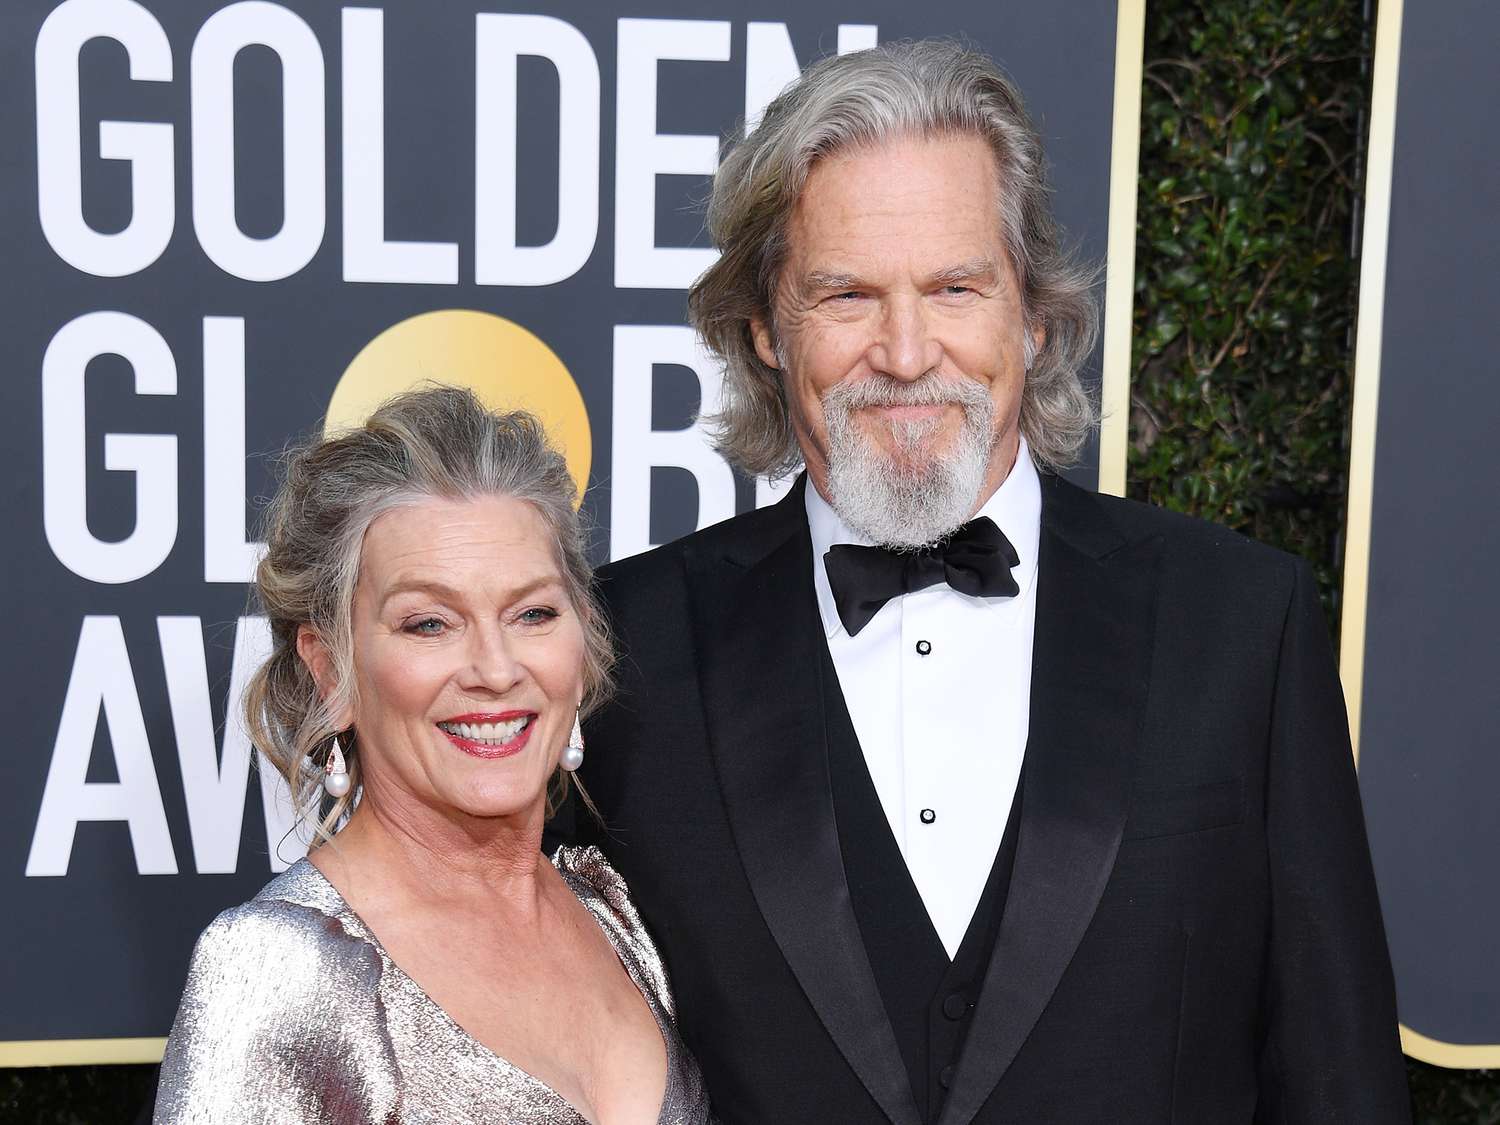 Susan Geston and Jeff Bridges attend the 76th Annual Golden Globe Awards at The Beverly Hilton Hotel on January 6, 2019 in Beverly Hills, California